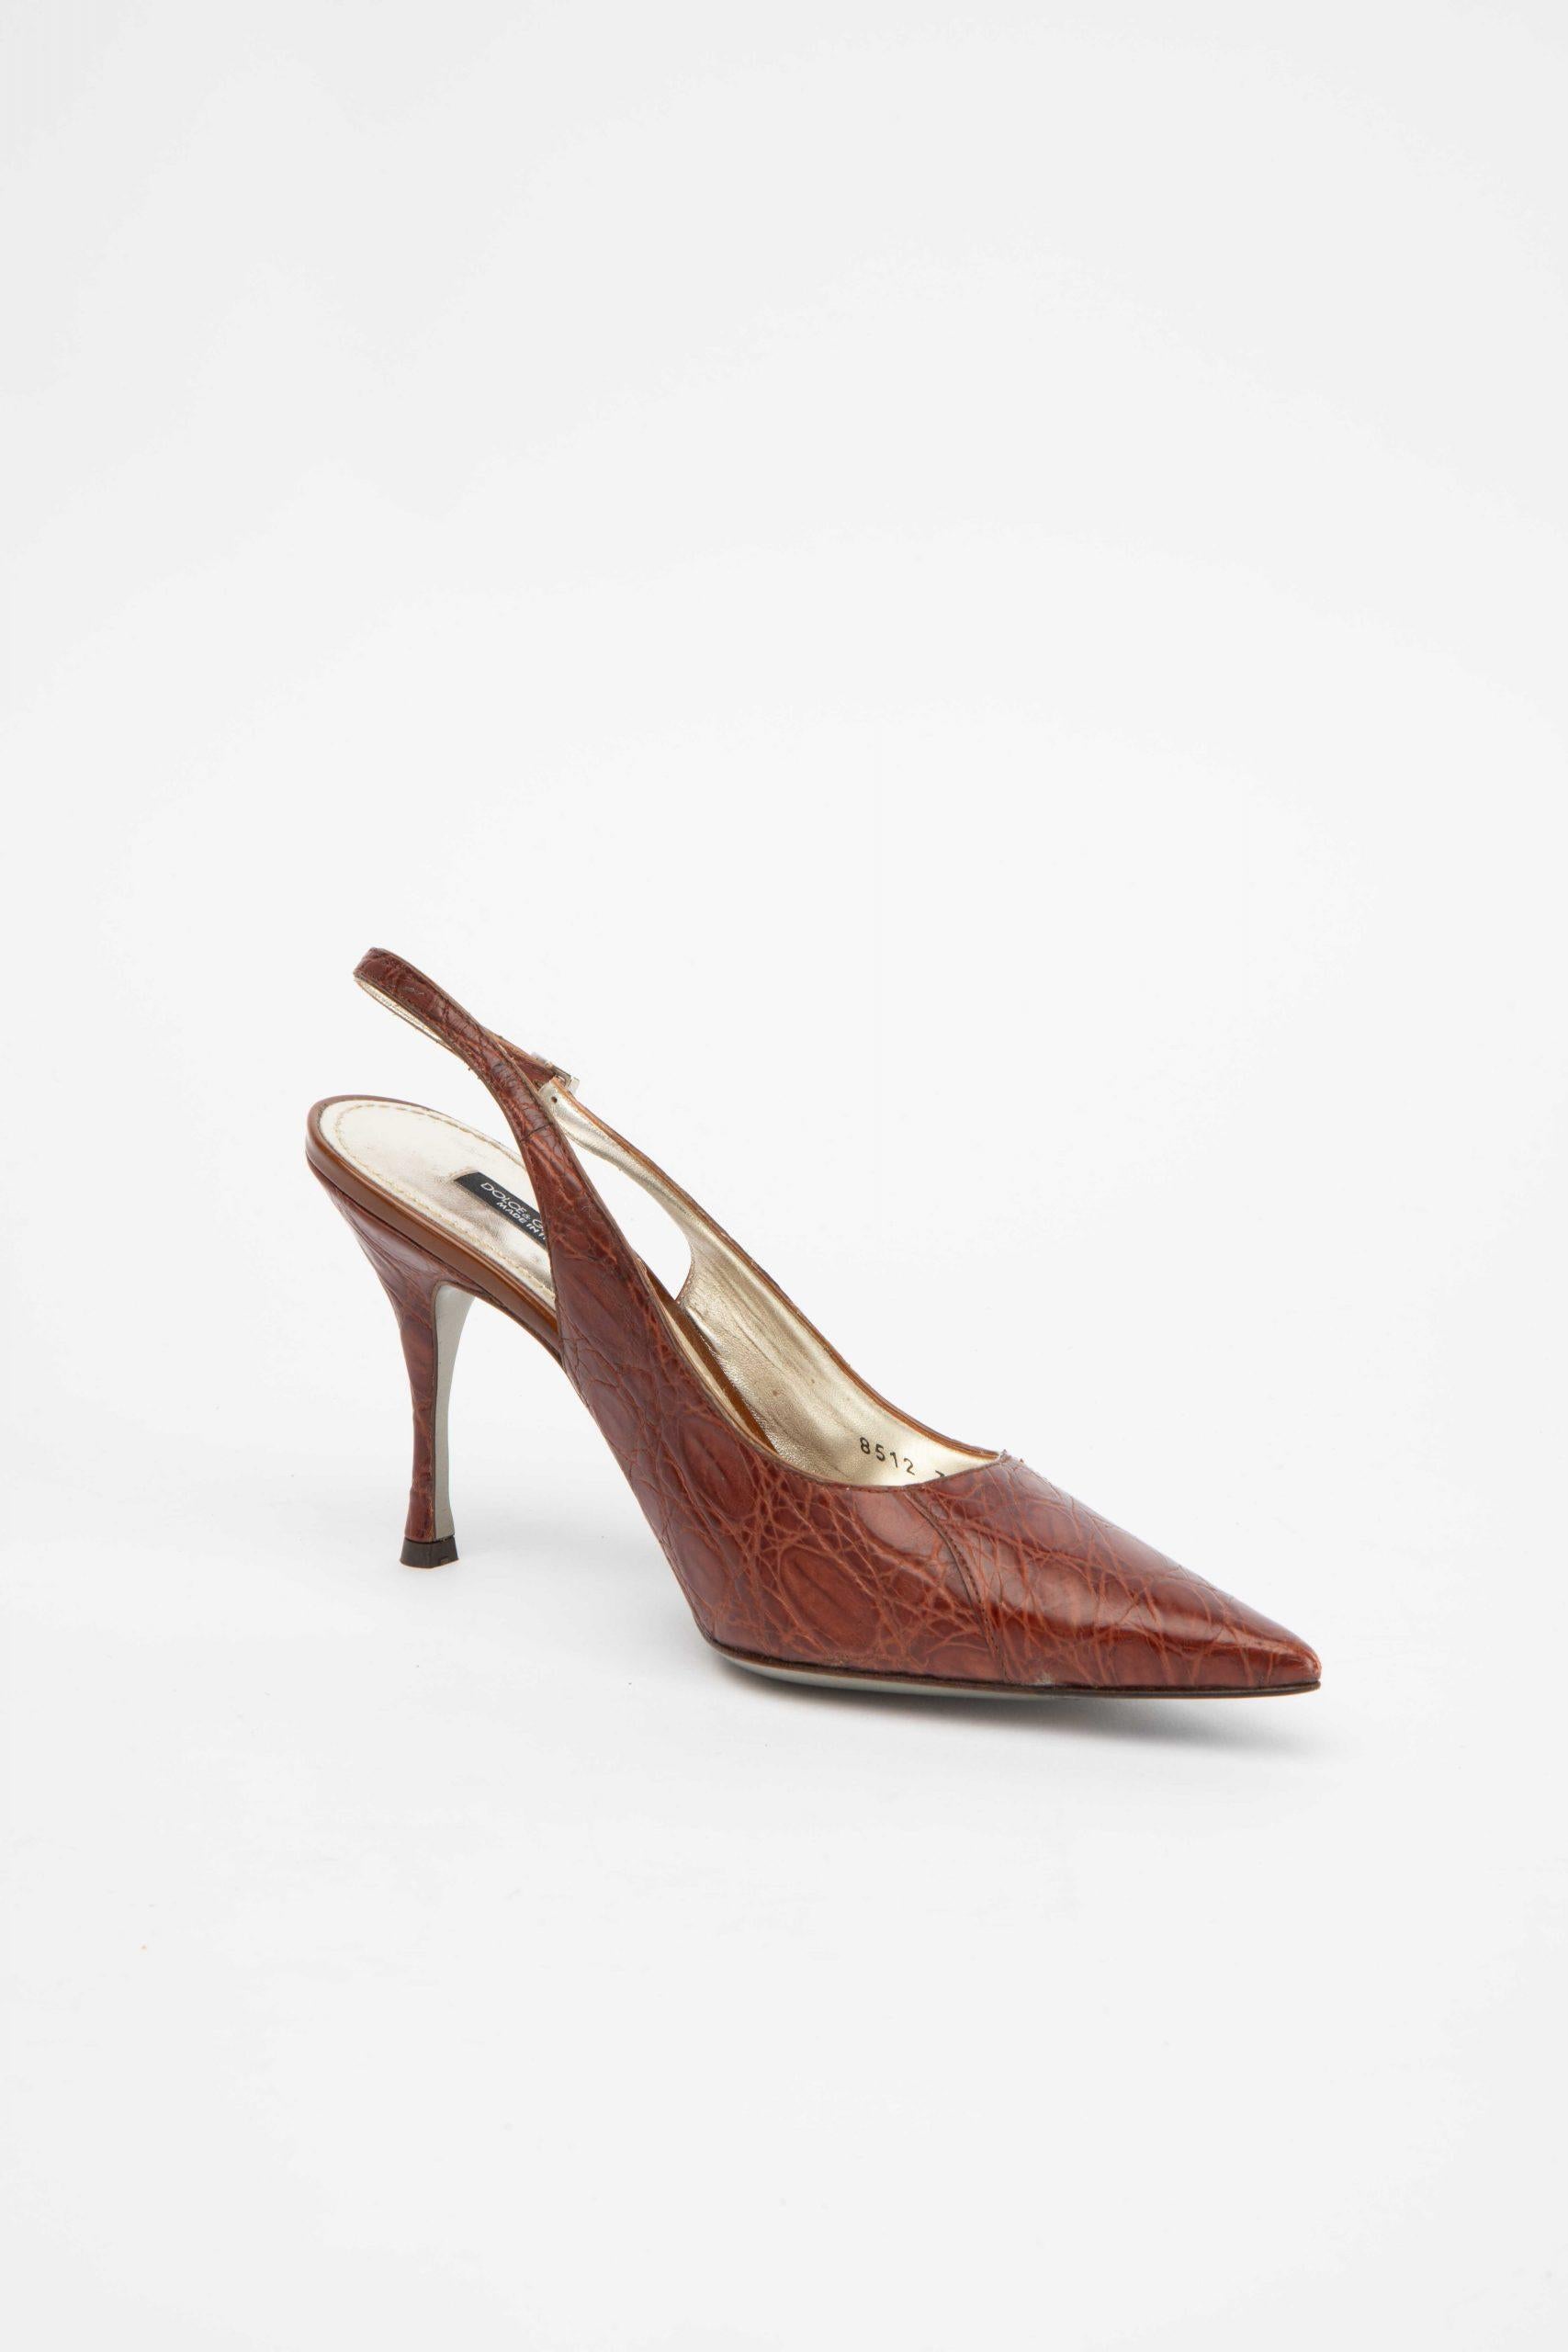 CONDITION is Very good. Minimal wear to heels is evident. Minimal wear to the ankle straps and the insole on this used Dolce & Gabbana designer resale item. 
 
 Details
  Brown
 Crocodile skin leather
 Slingback heels
 Pointed toe
 High heel
 Ankle